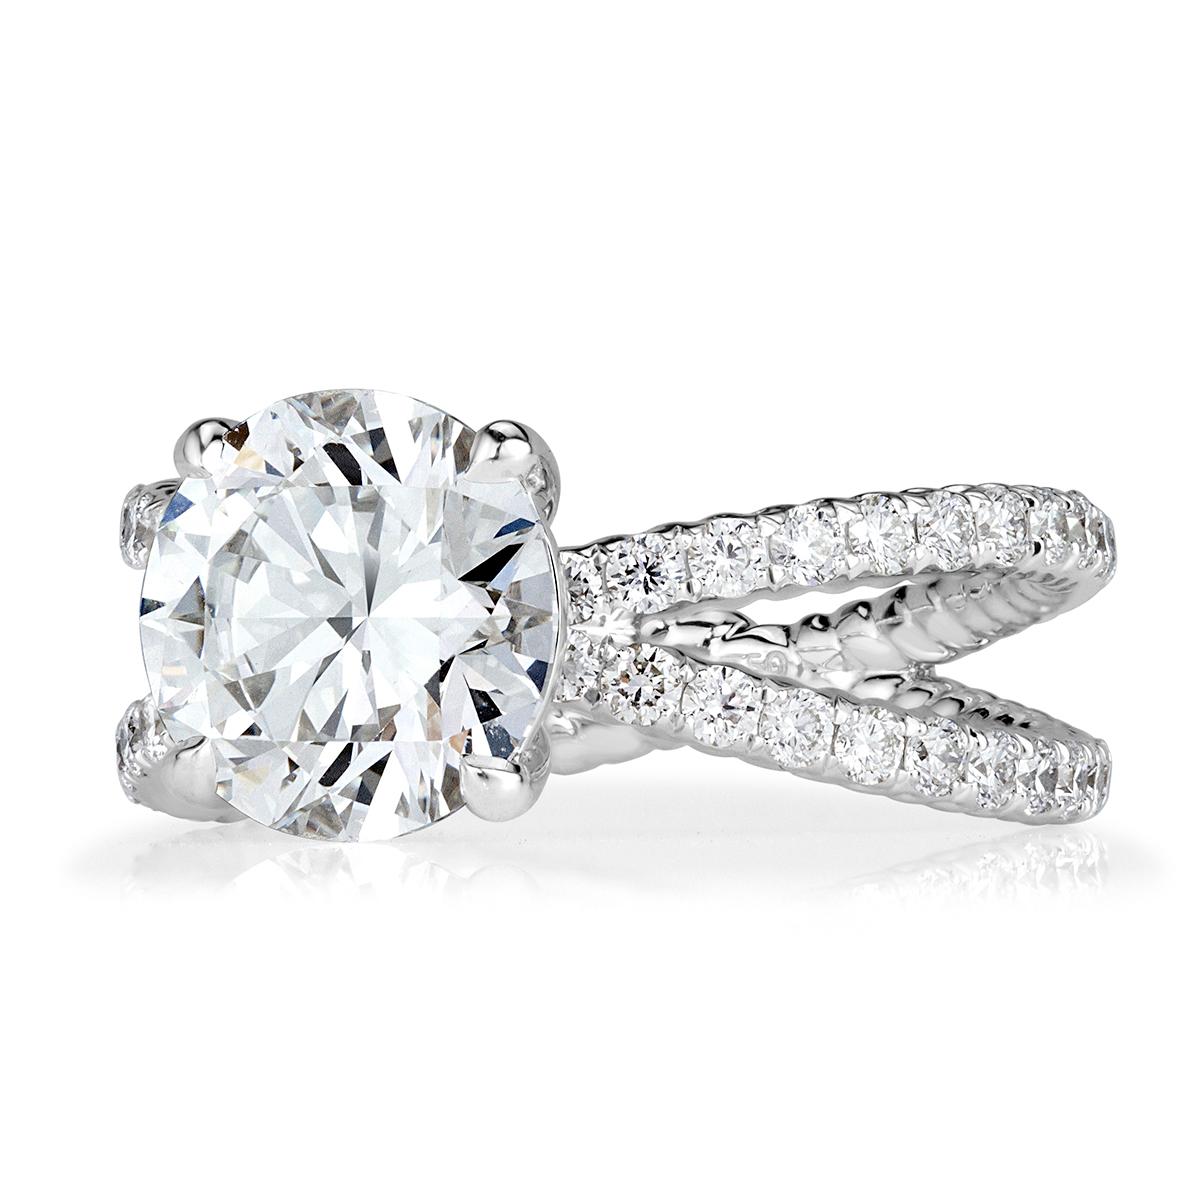 This stunning diamond engagement ring showcases a mesmerizing 2.75ct round brilliant cut center diamond, GIA certified at H in color, VS2 in clarity. It is poised atop a unique 18k white gold shank micro pavé set with 0.80ct of smaller round